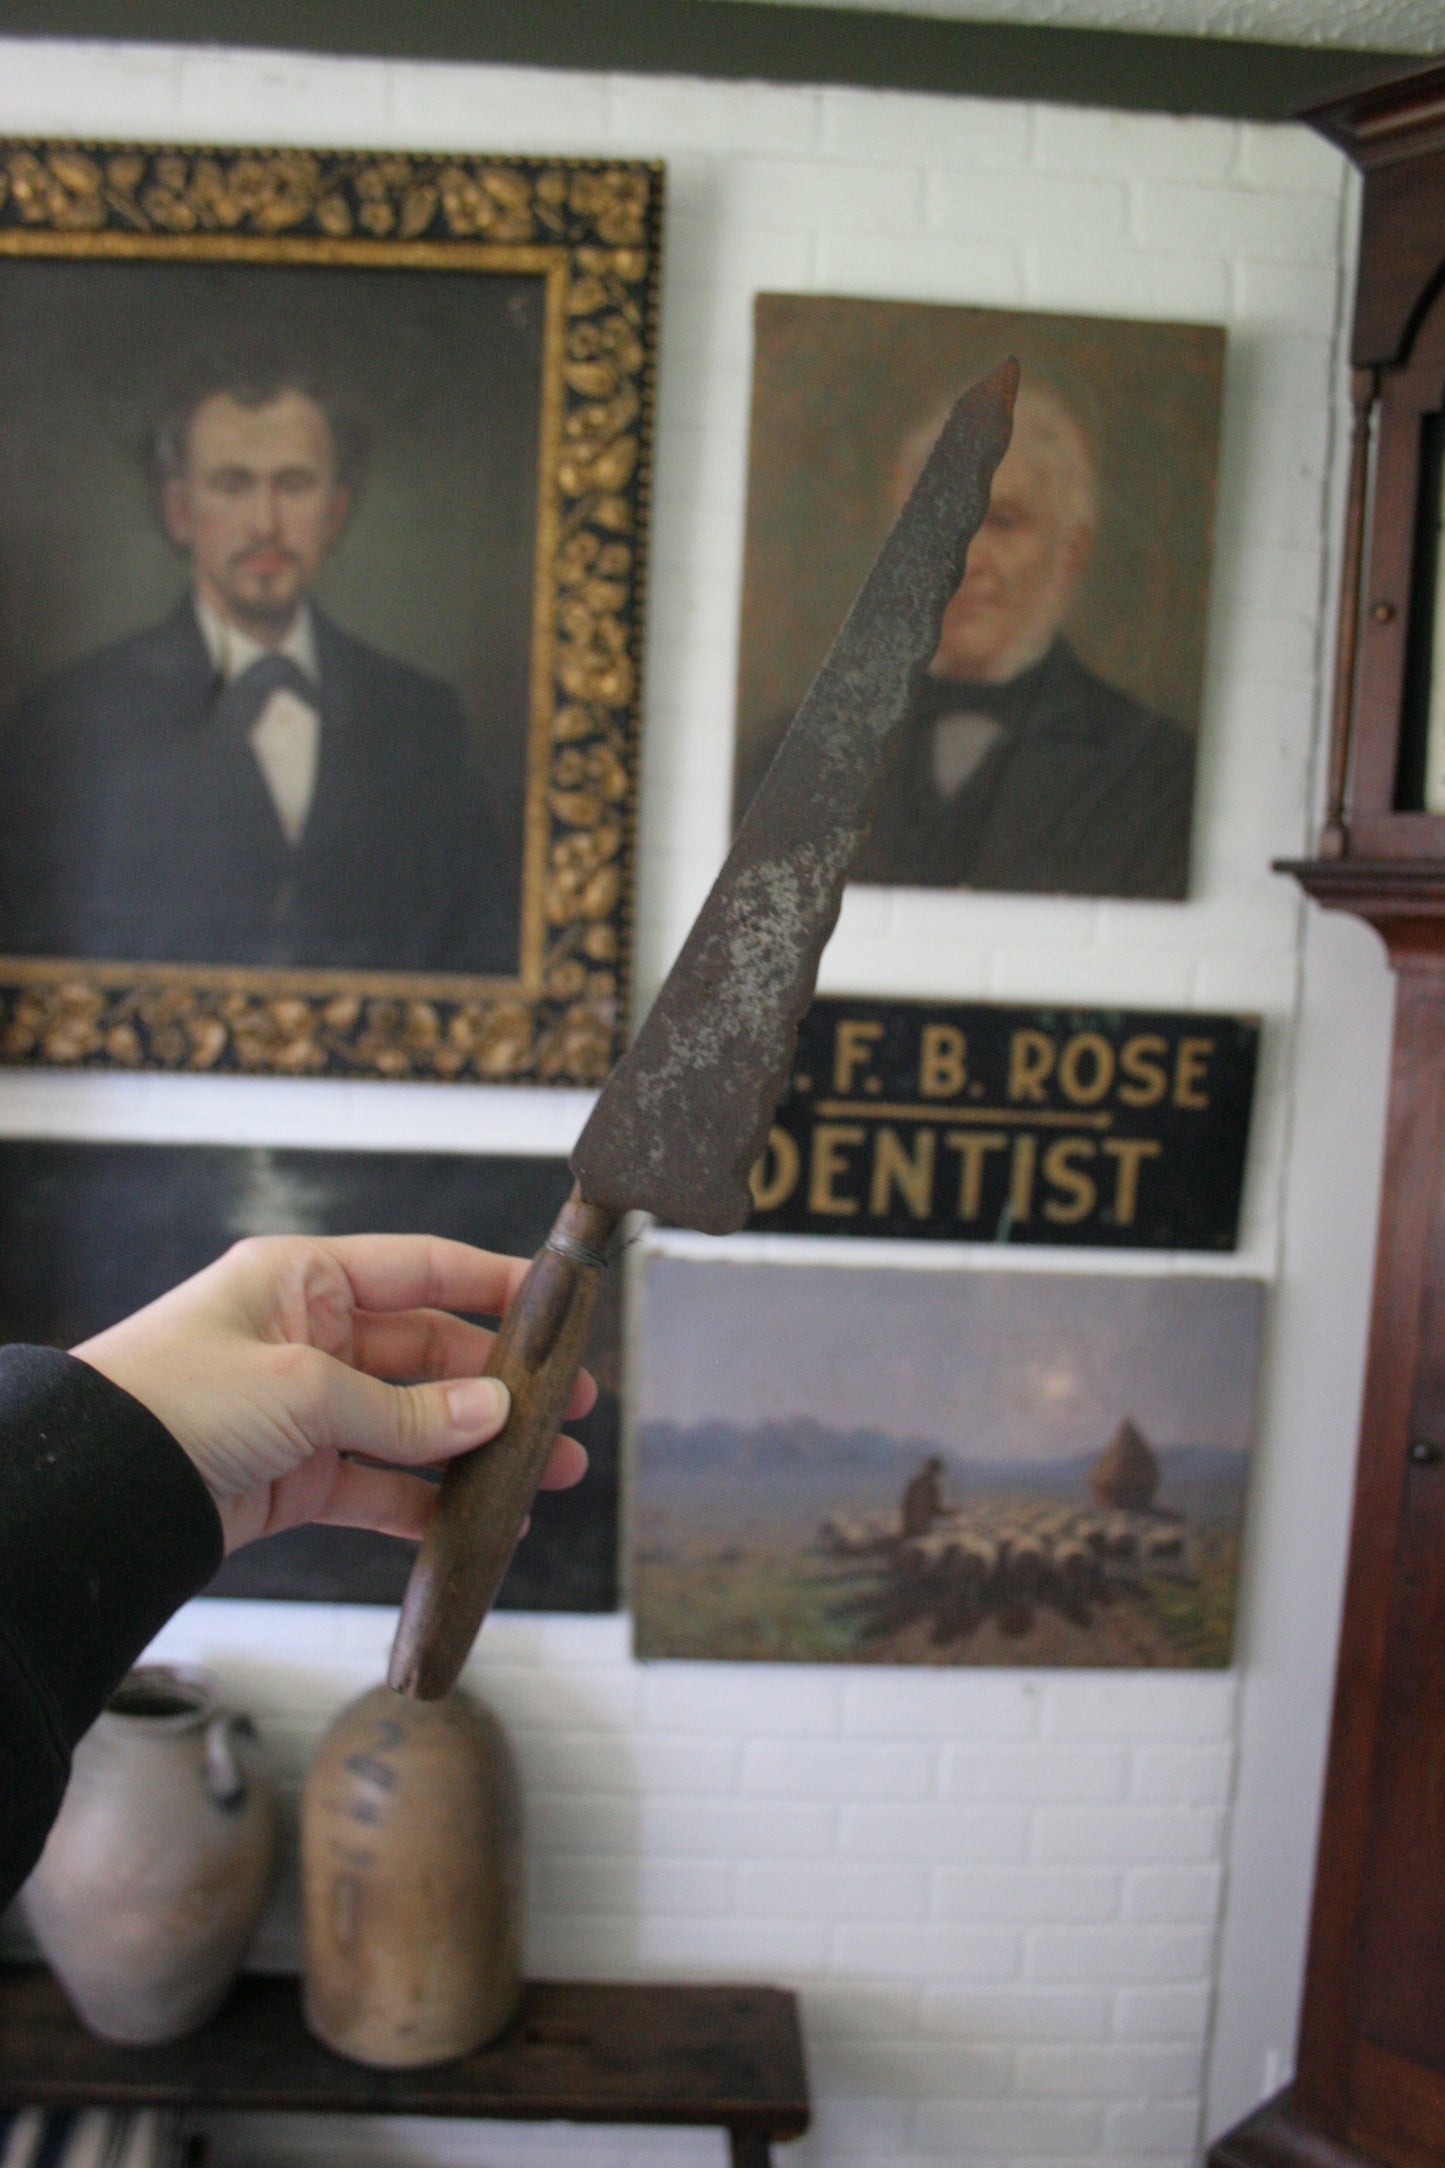 Antique bread knife